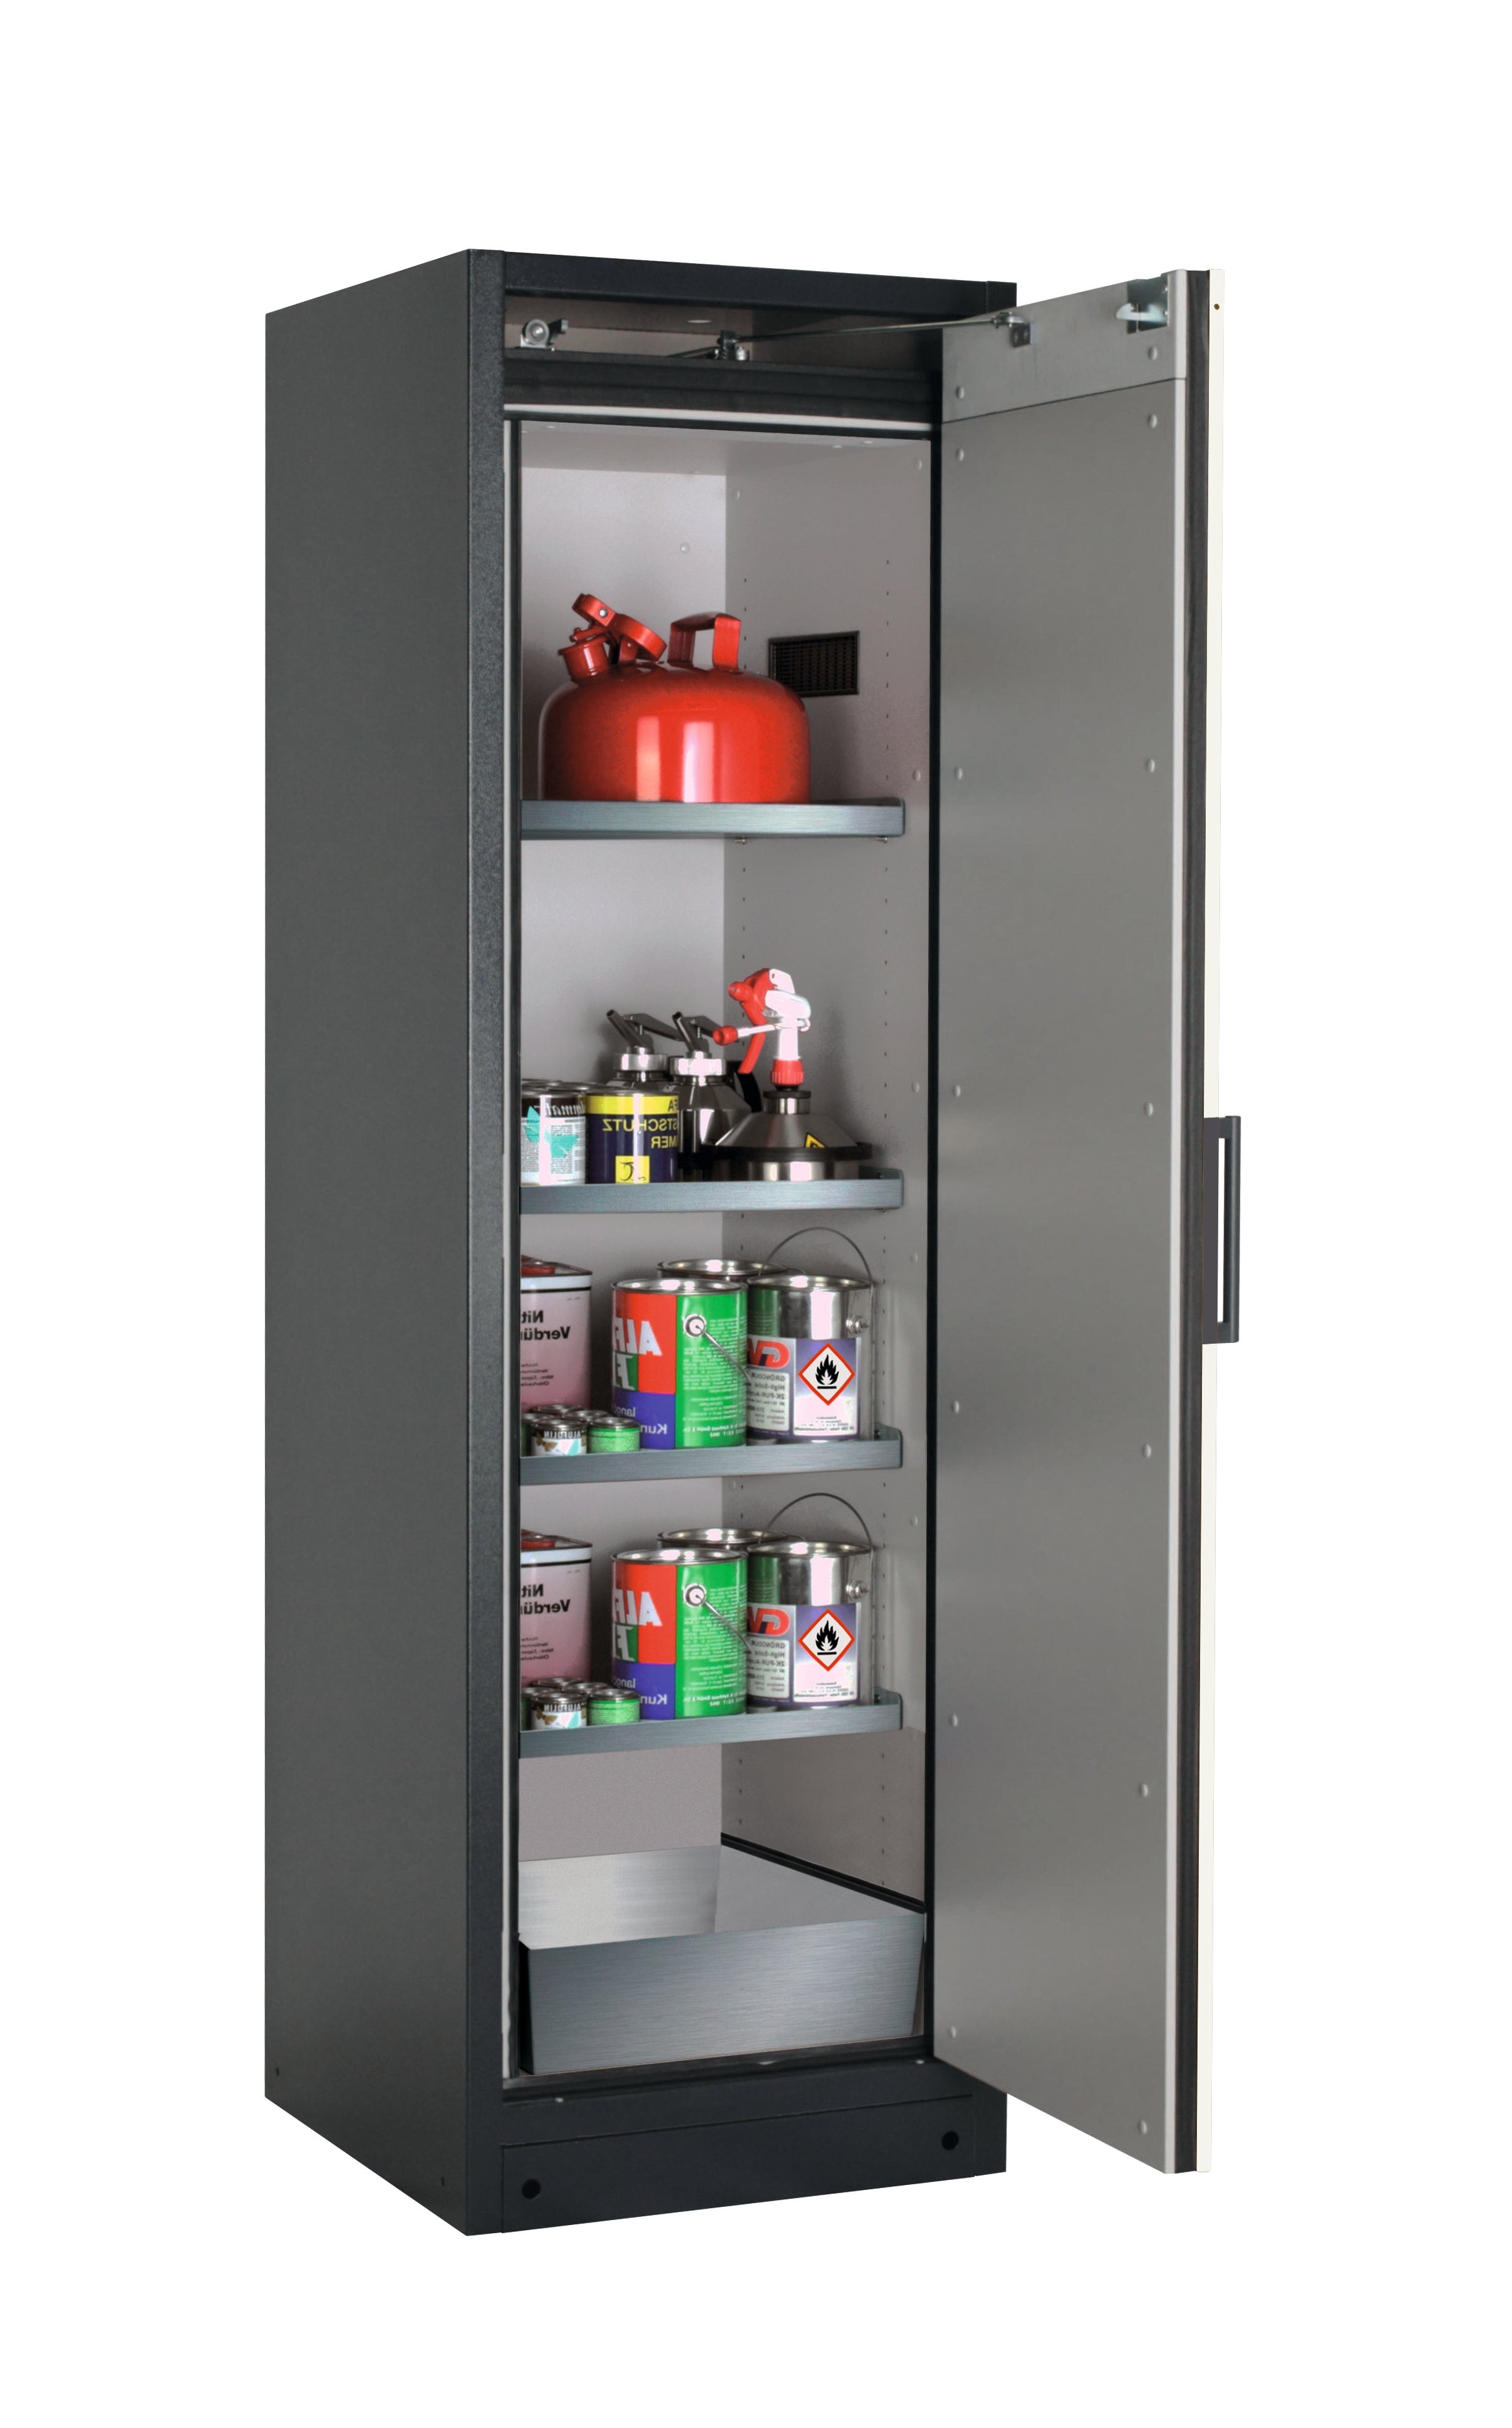 Type 90 safety storage cabinet Q-CLASSIC-90 model Q90.195.060.R in asecos silver with 4x shelf standard (stainless steel 1.4301),